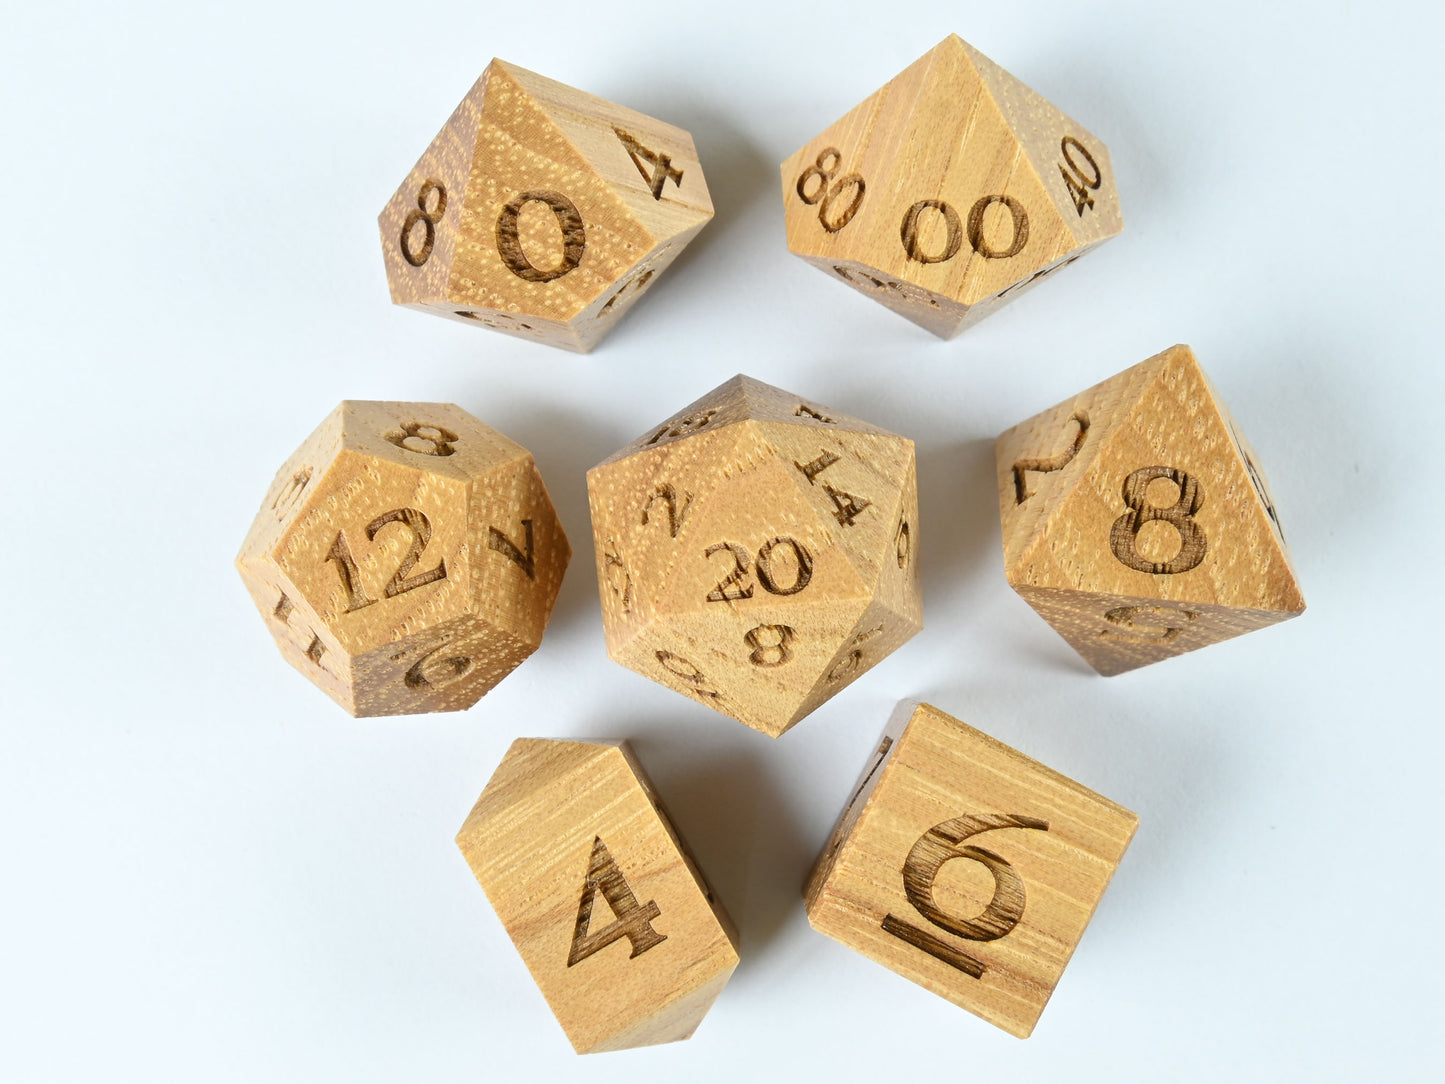 Hickory wood dice set for dnd rpg